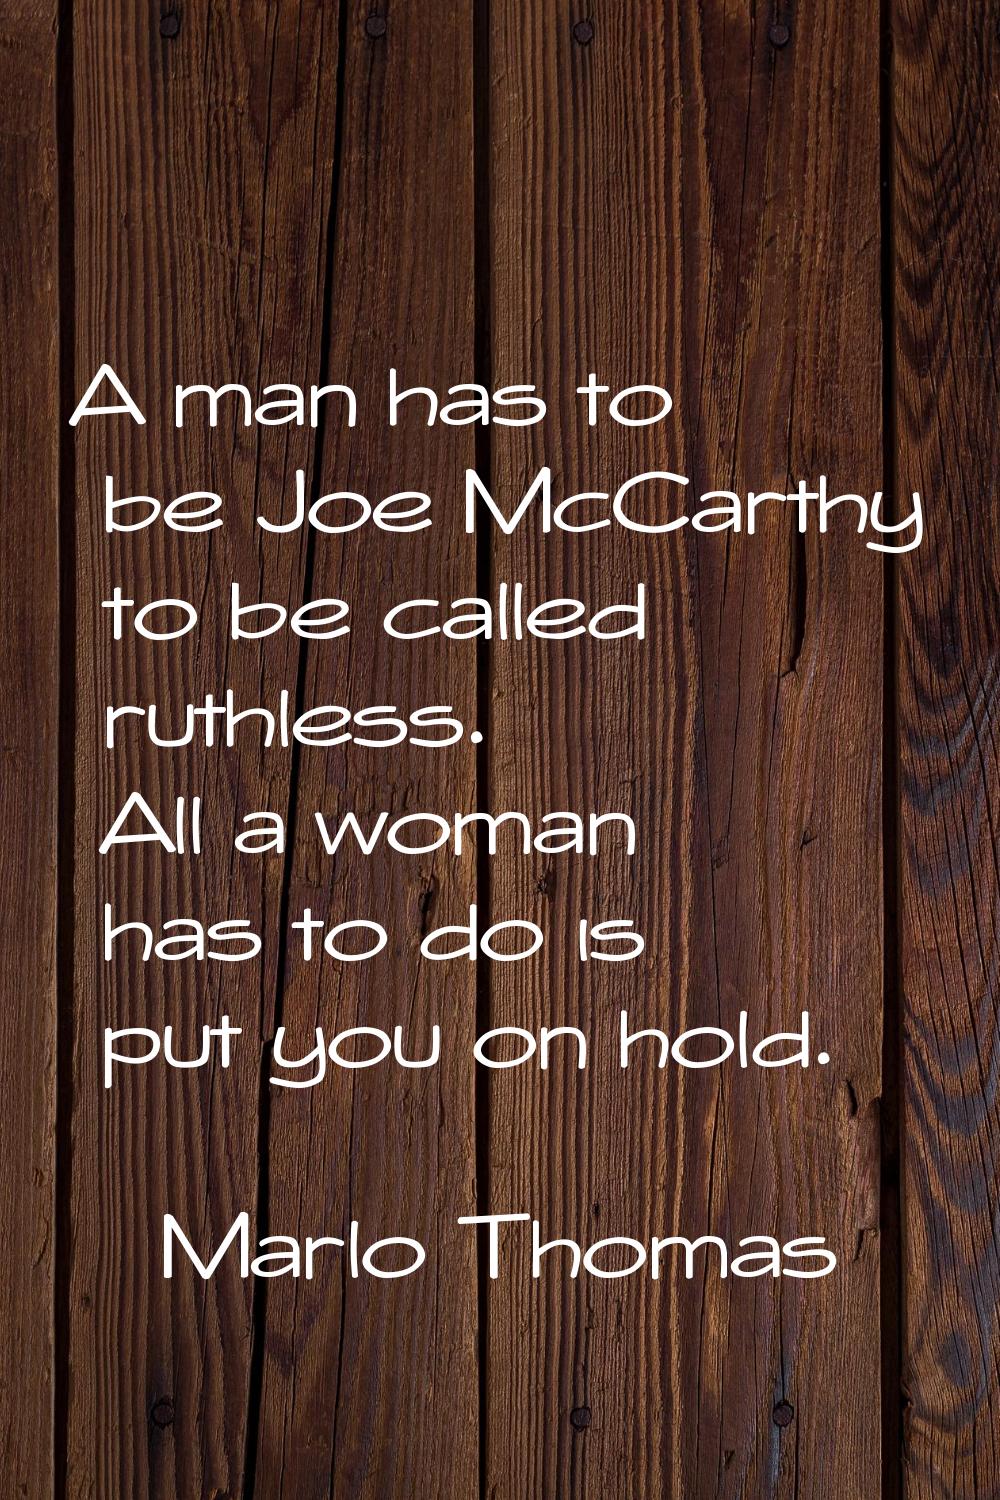 A man has to be Joe McCarthy to be called ruthless. All a woman has to do is put you on hold.